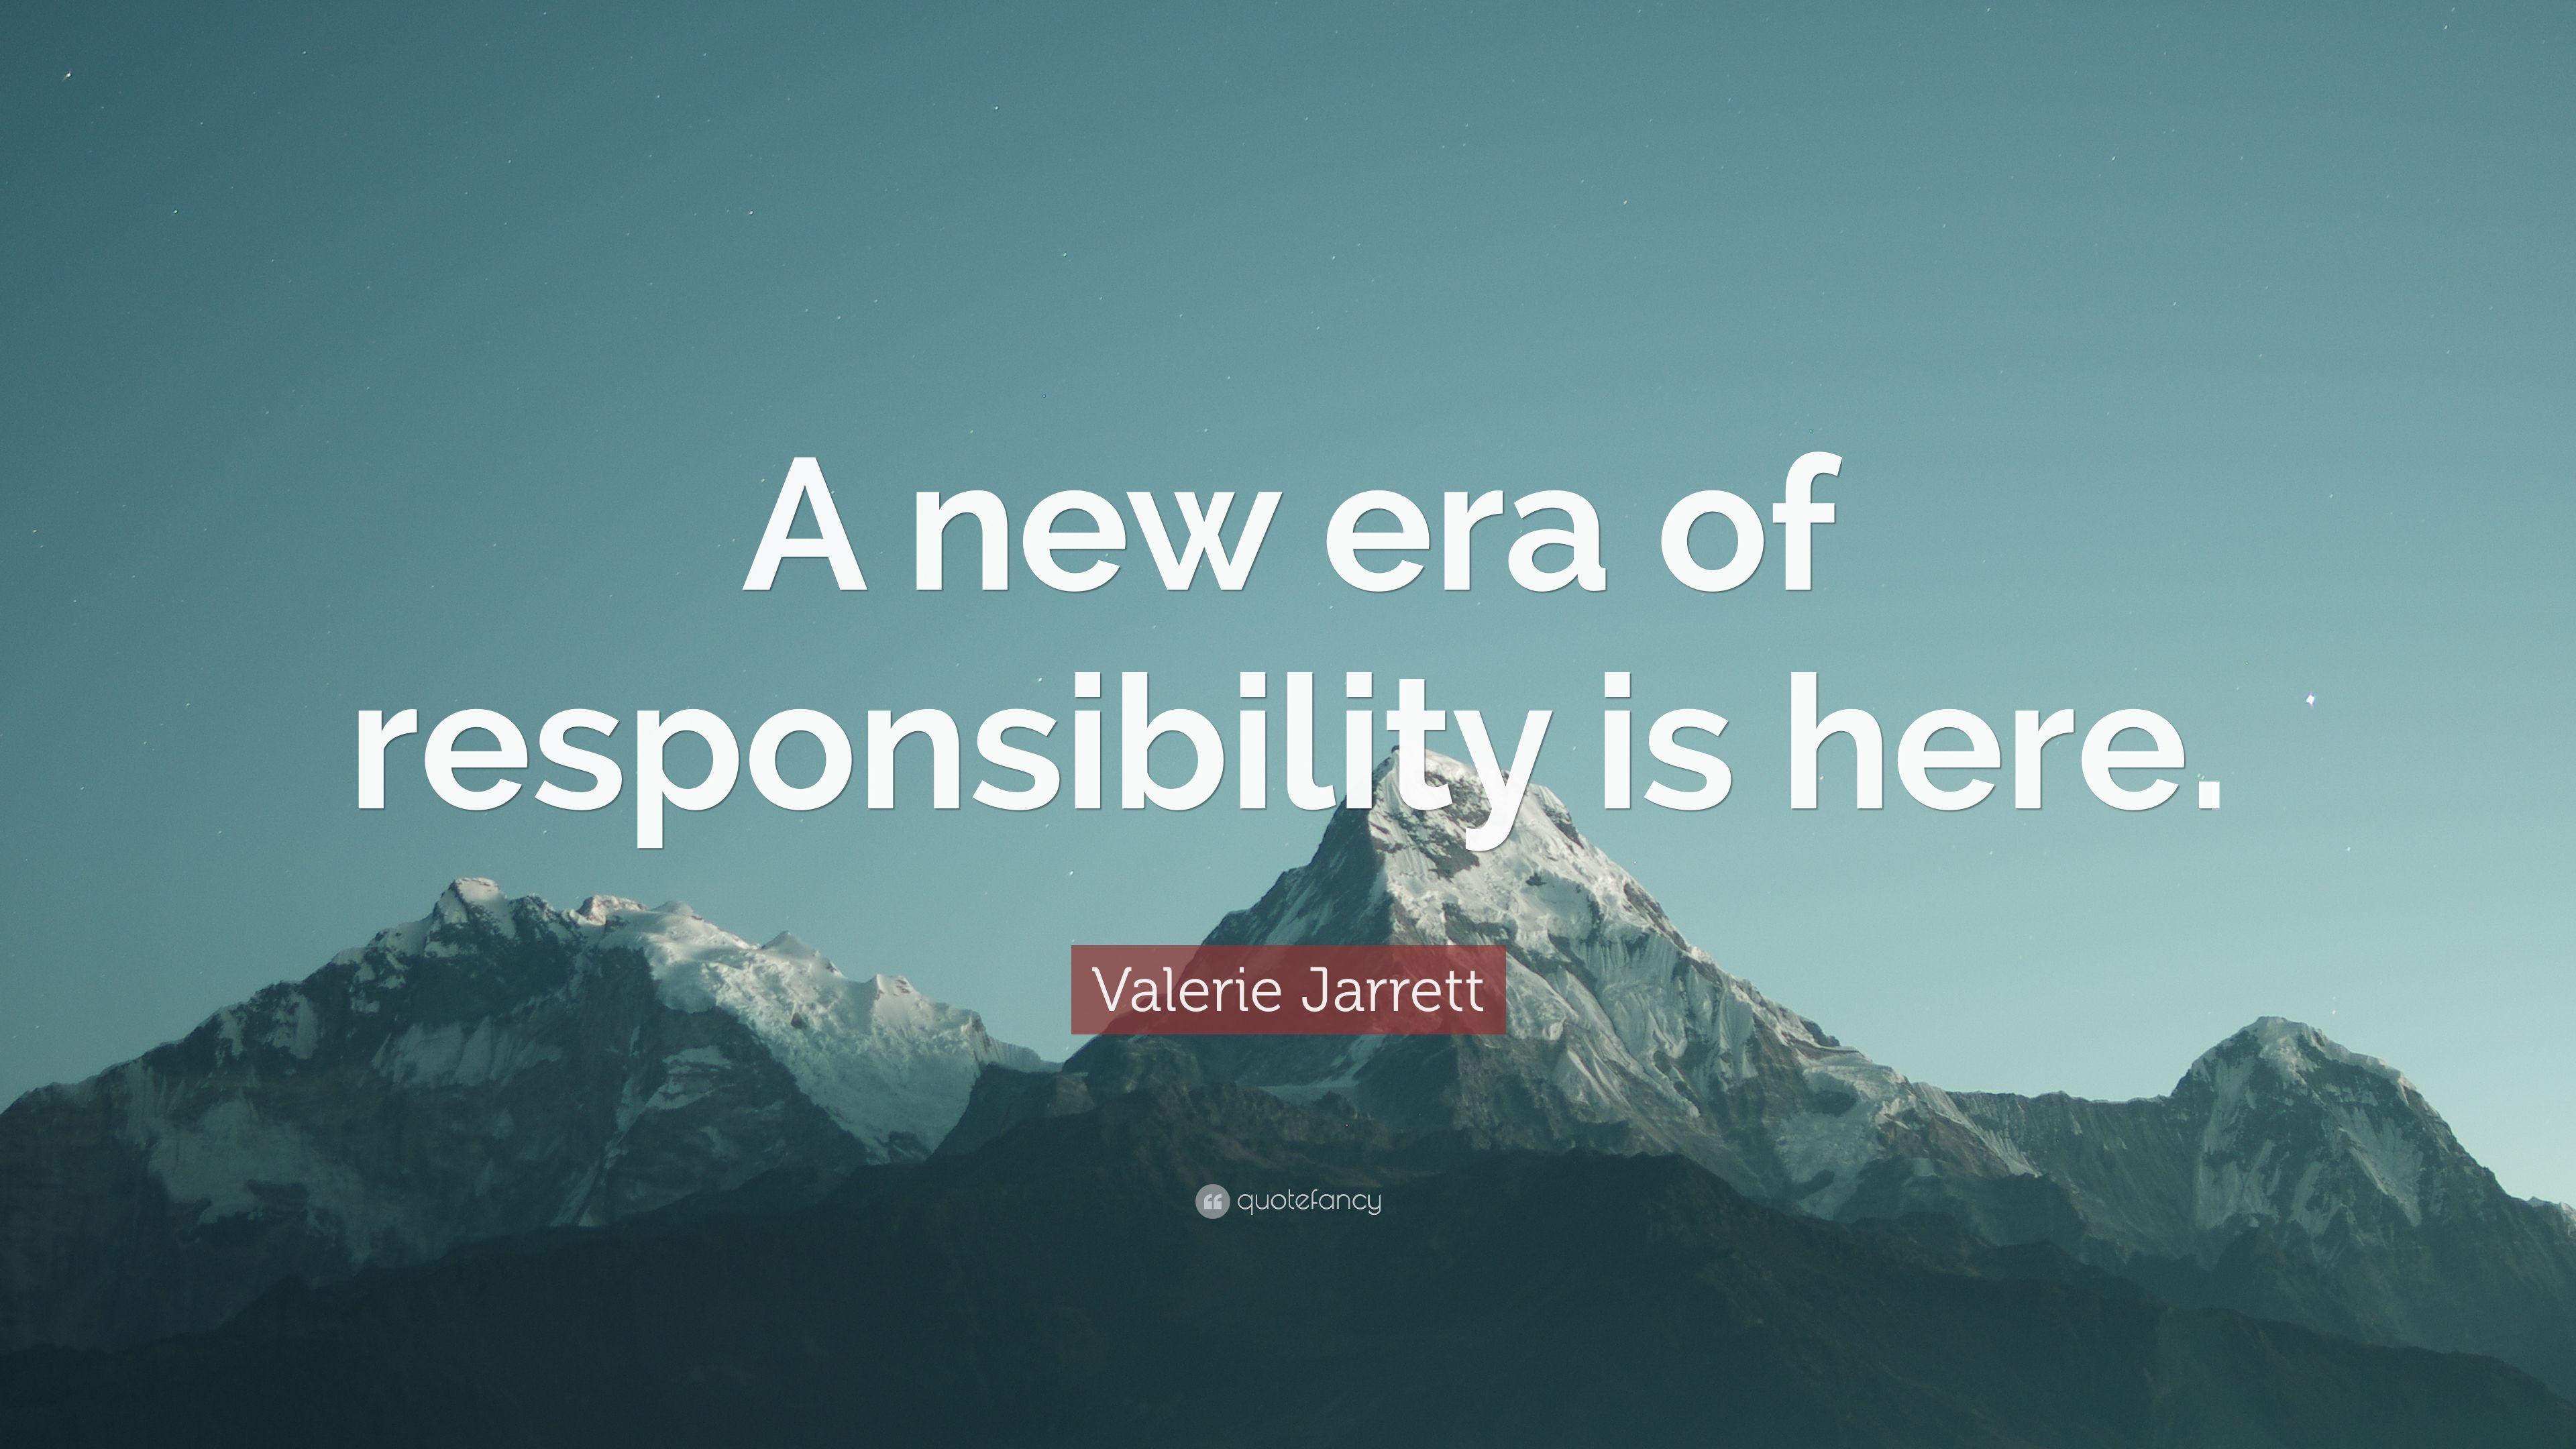 Valerie Jarrett Quote: “A new era of responsibility is here.” 7